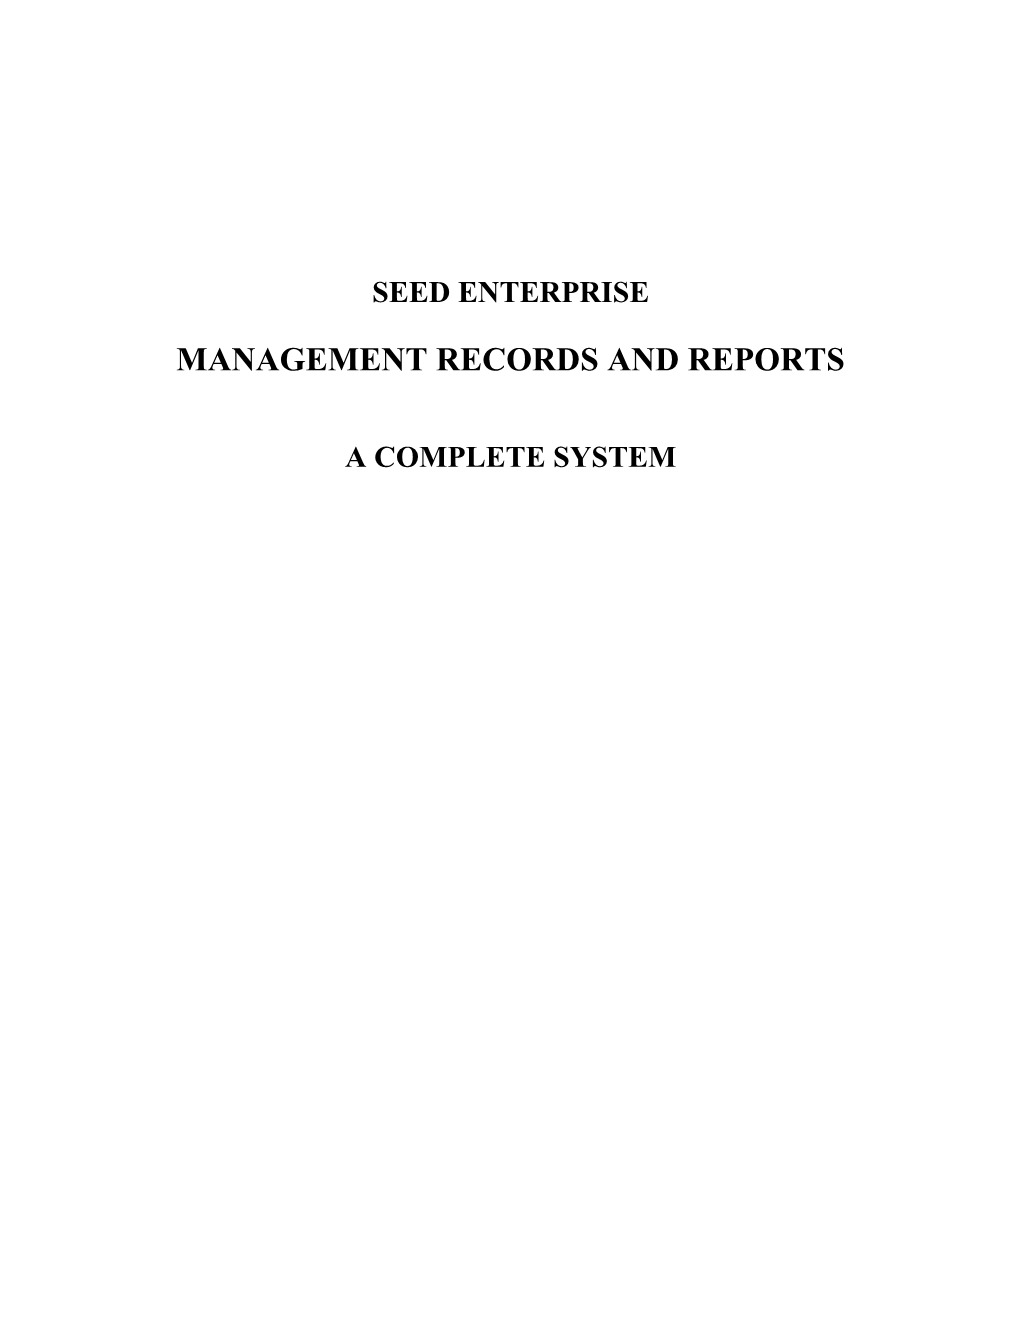 Management Records and Reports